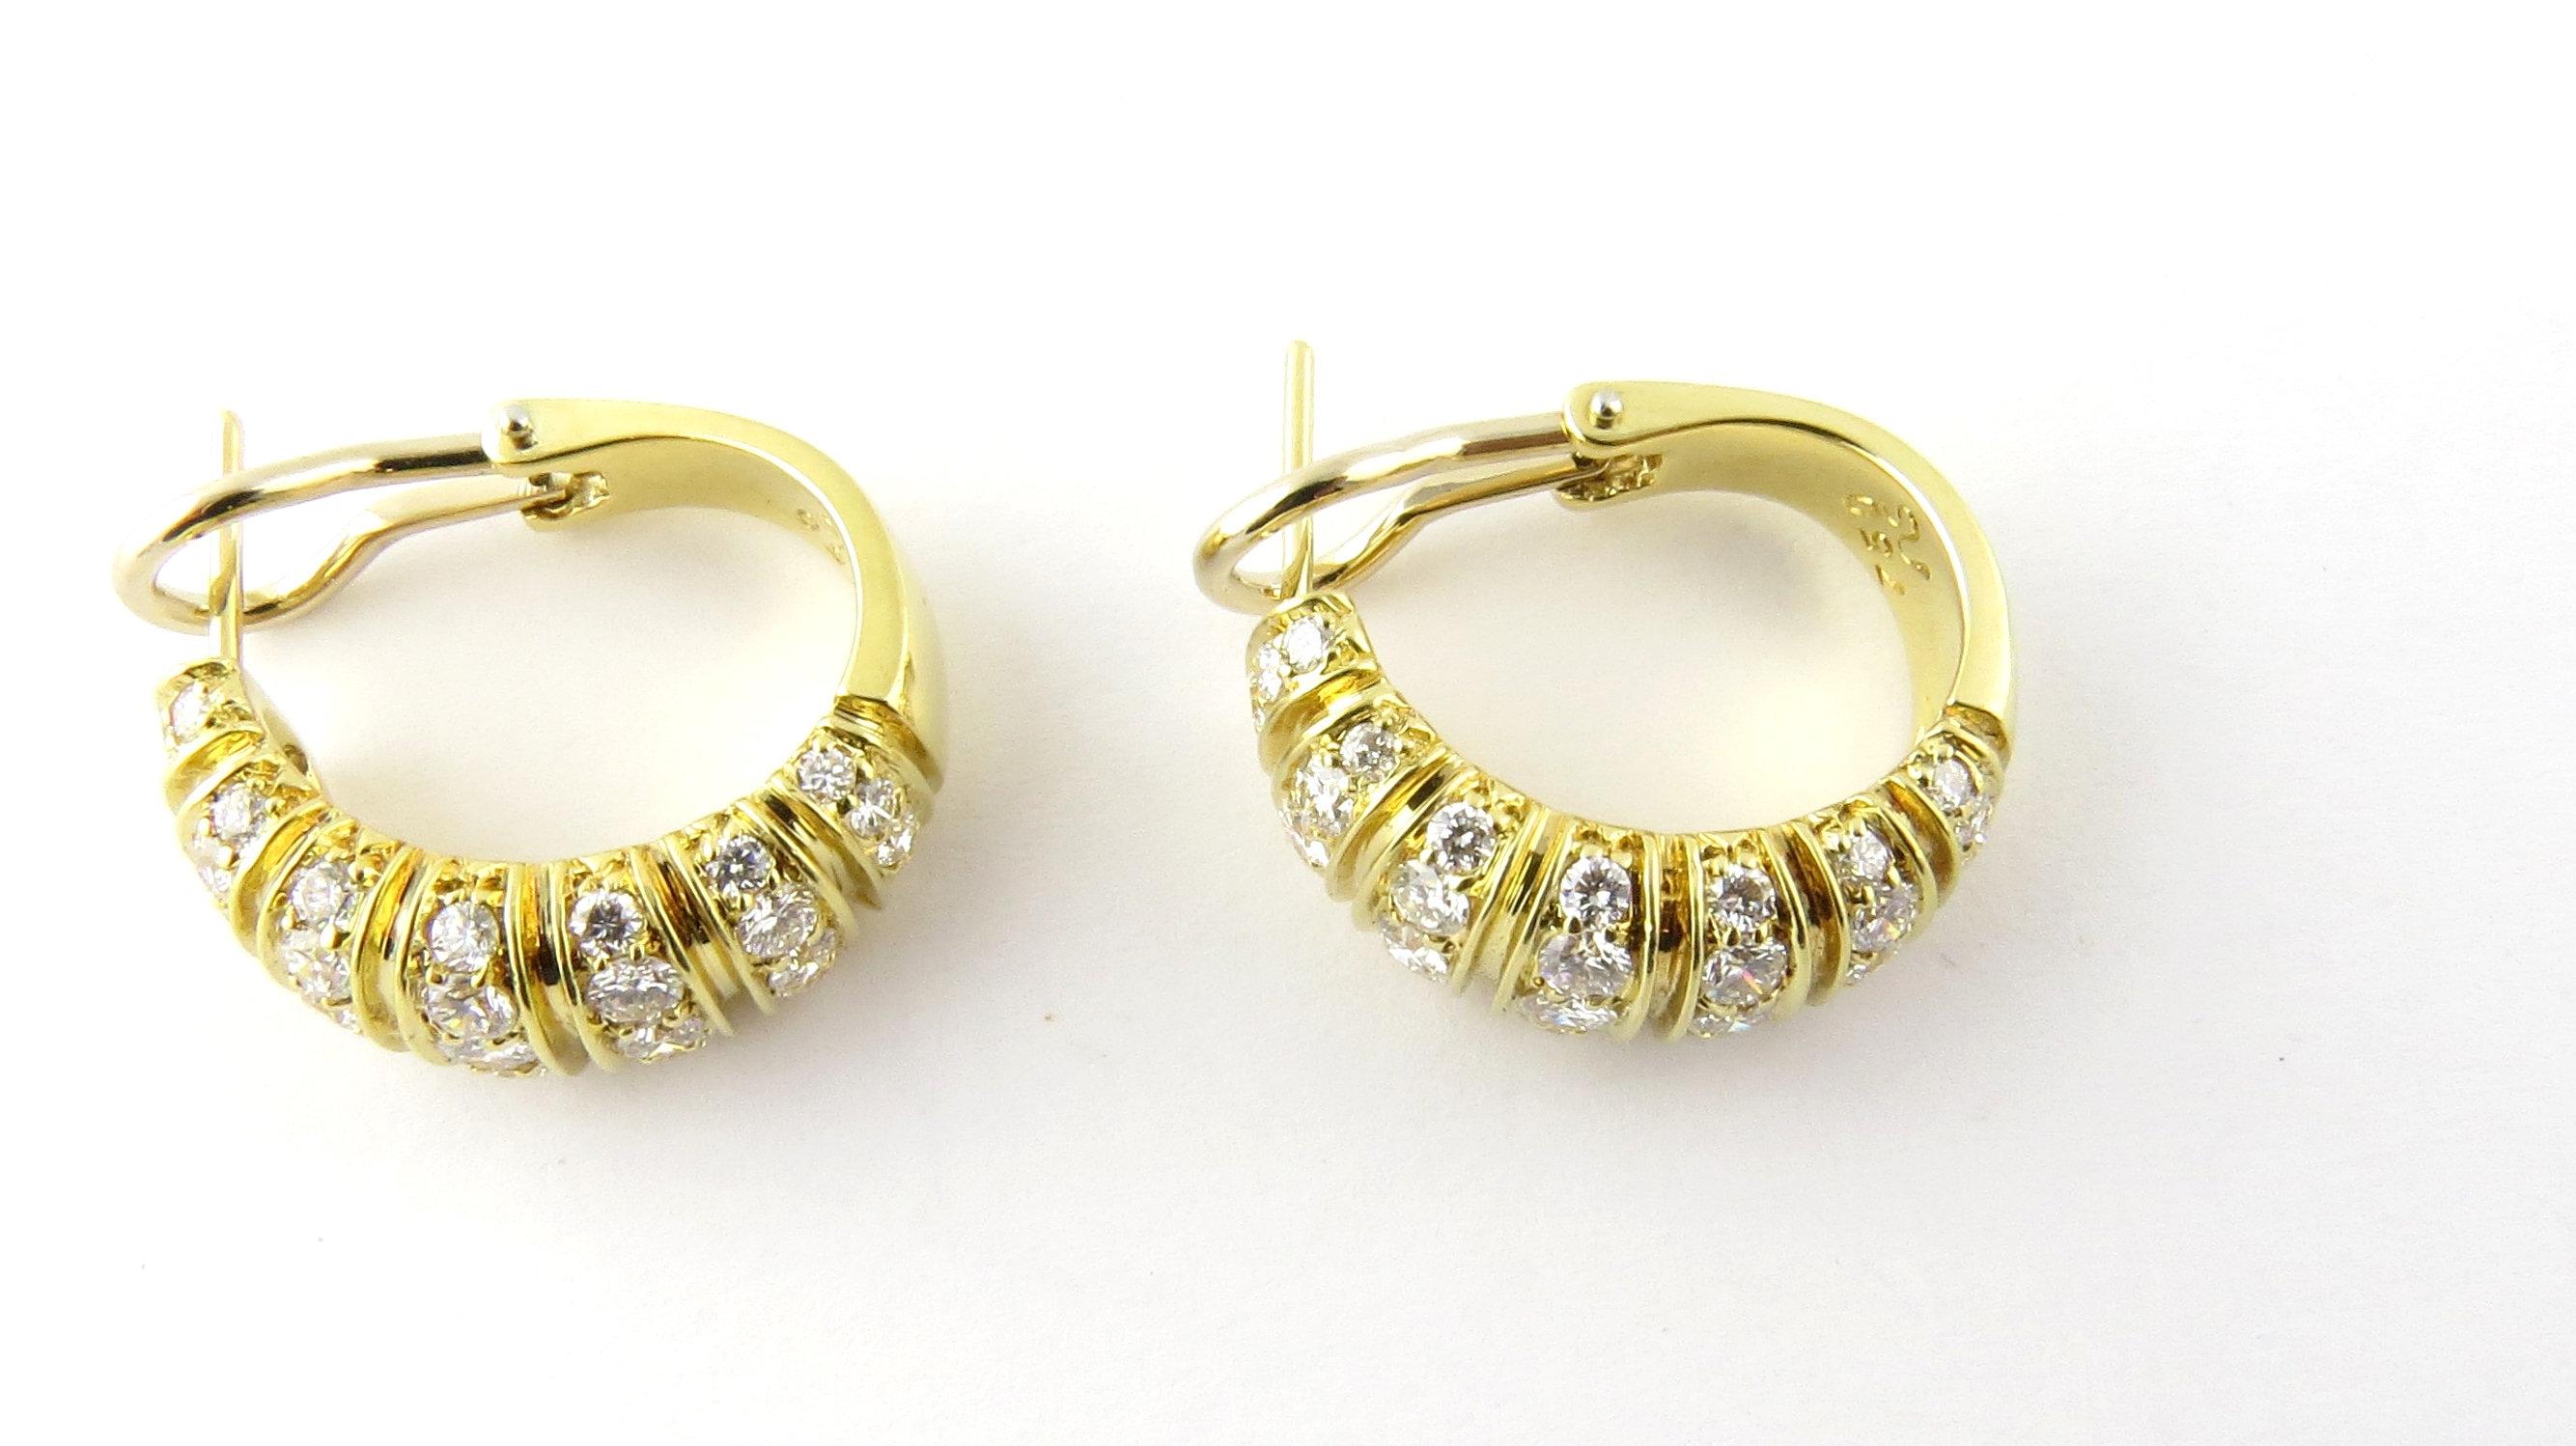 Vintage 18K Yellow Gold Diamond Oval Hoop Earrings

These oval hoop earrings shine with sparkle from the diamonds and the polished gold!

35 round brilliant diamonds per earring. Earrings total approx. 2.5 carats.

VS1 clarity and F-G